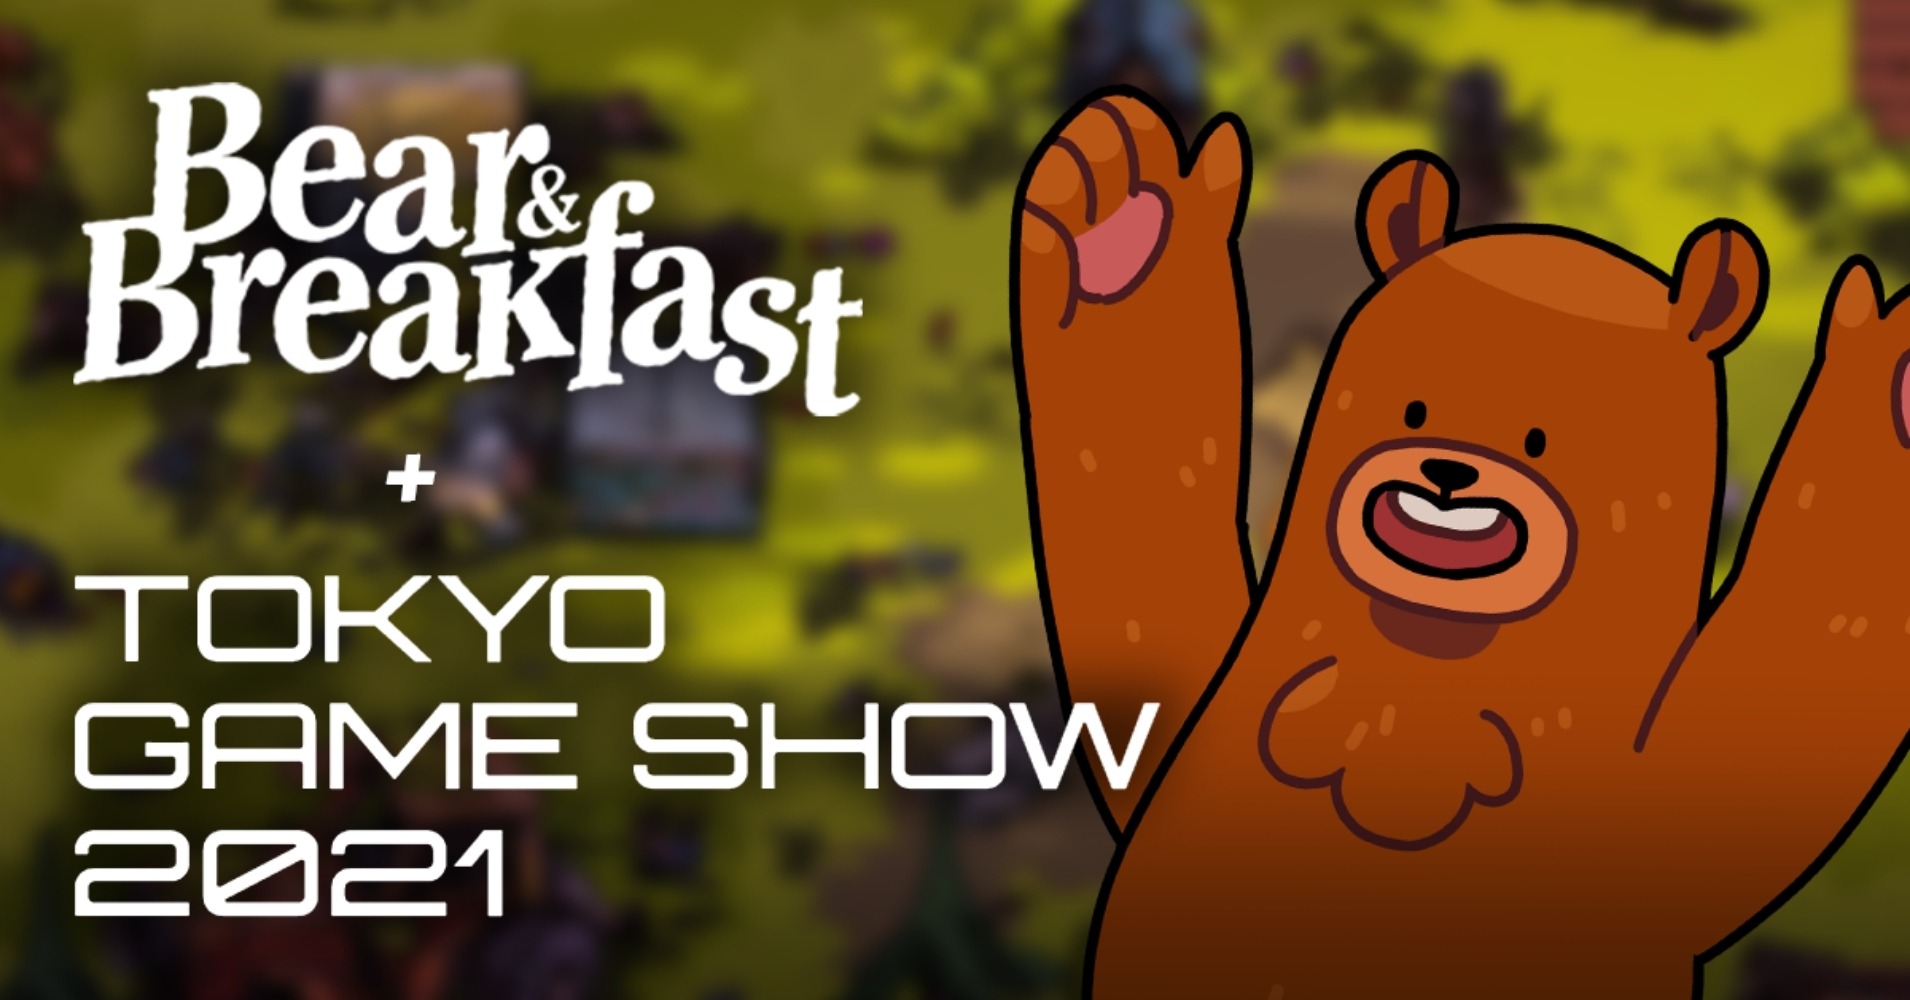 Tokyo Game Show 2021 Bear and Breakfast